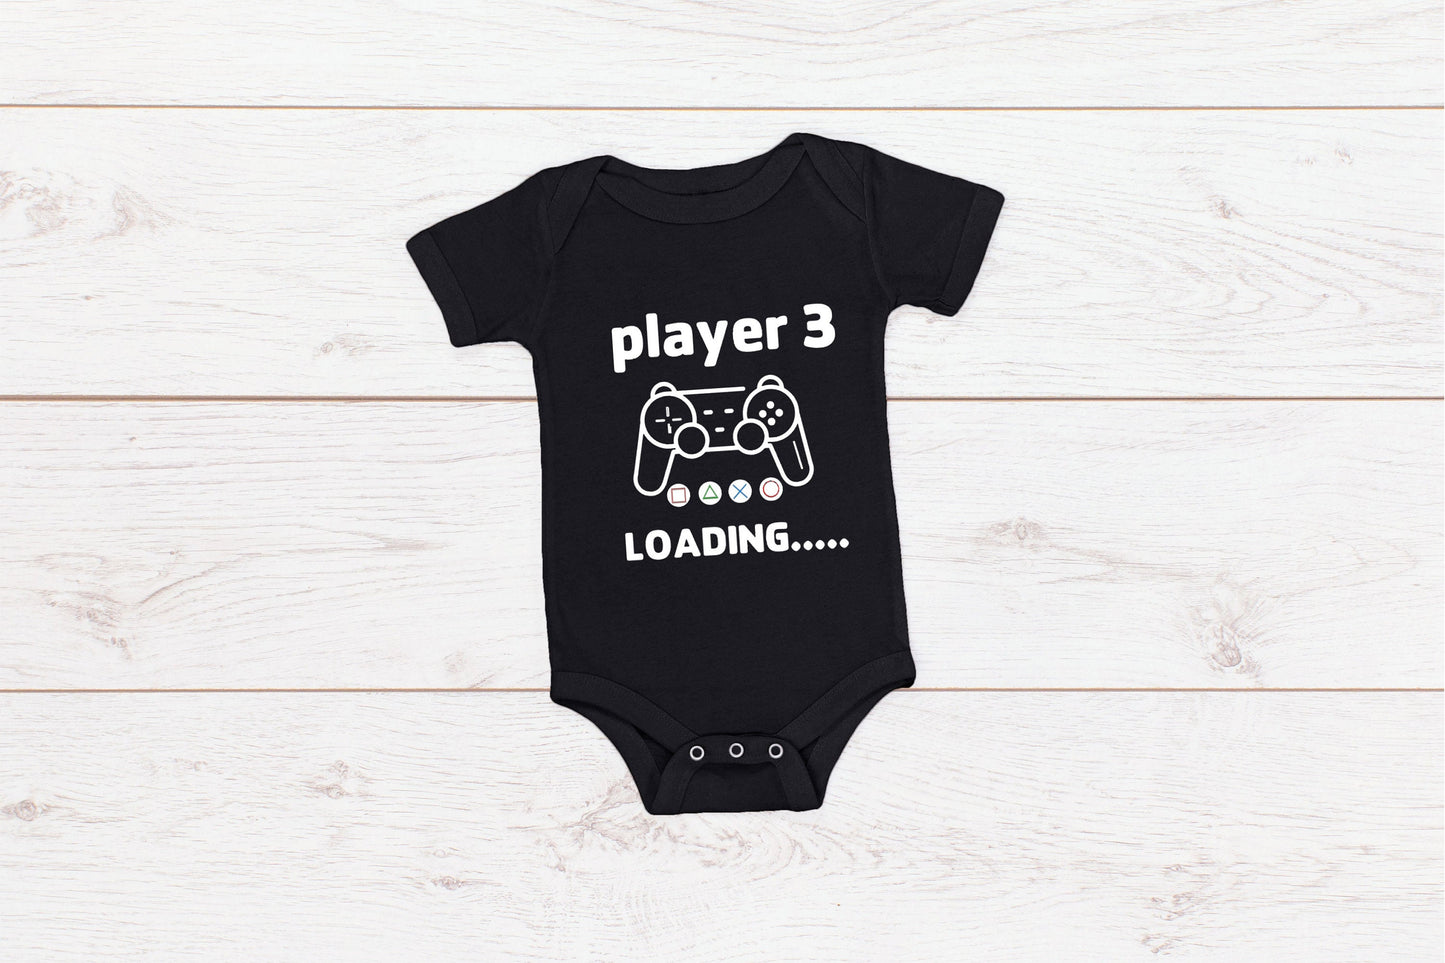 Baby Announcement "Player (insert number) Loading..."